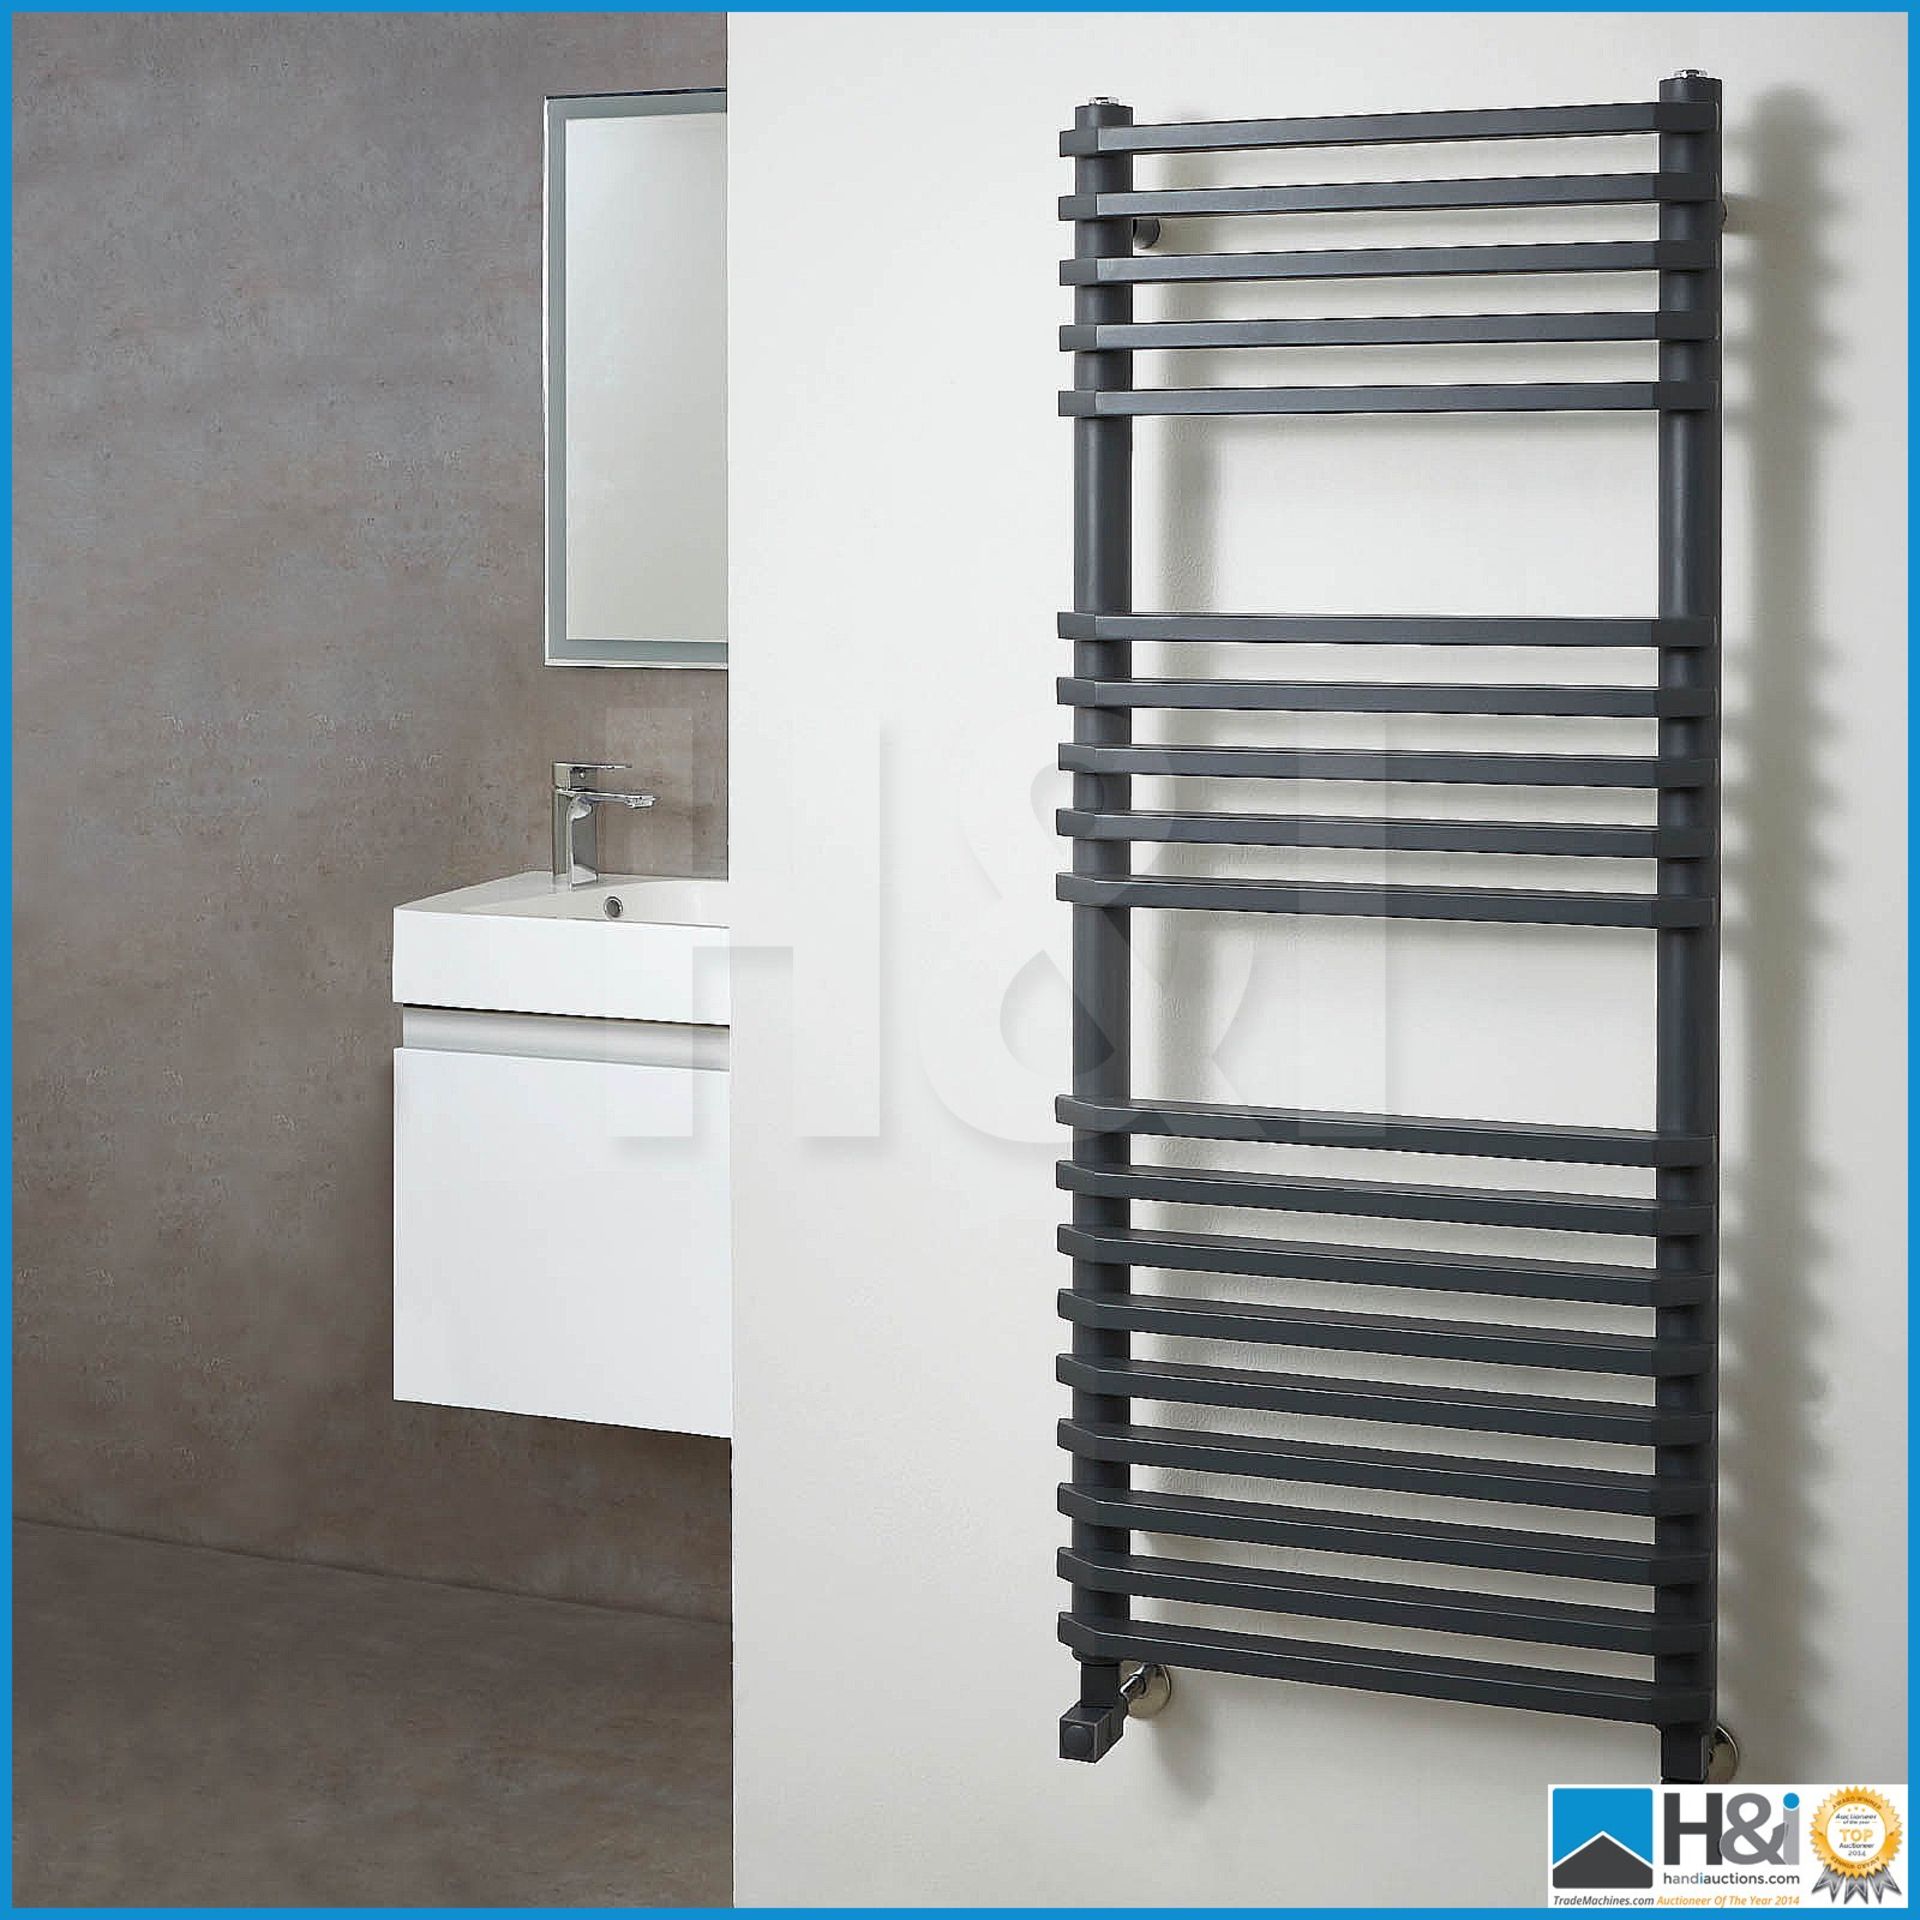 Designer Phoenix RA474 Diana curved anthracite heated towel rail 1200x500 .New and boxed. Suggested